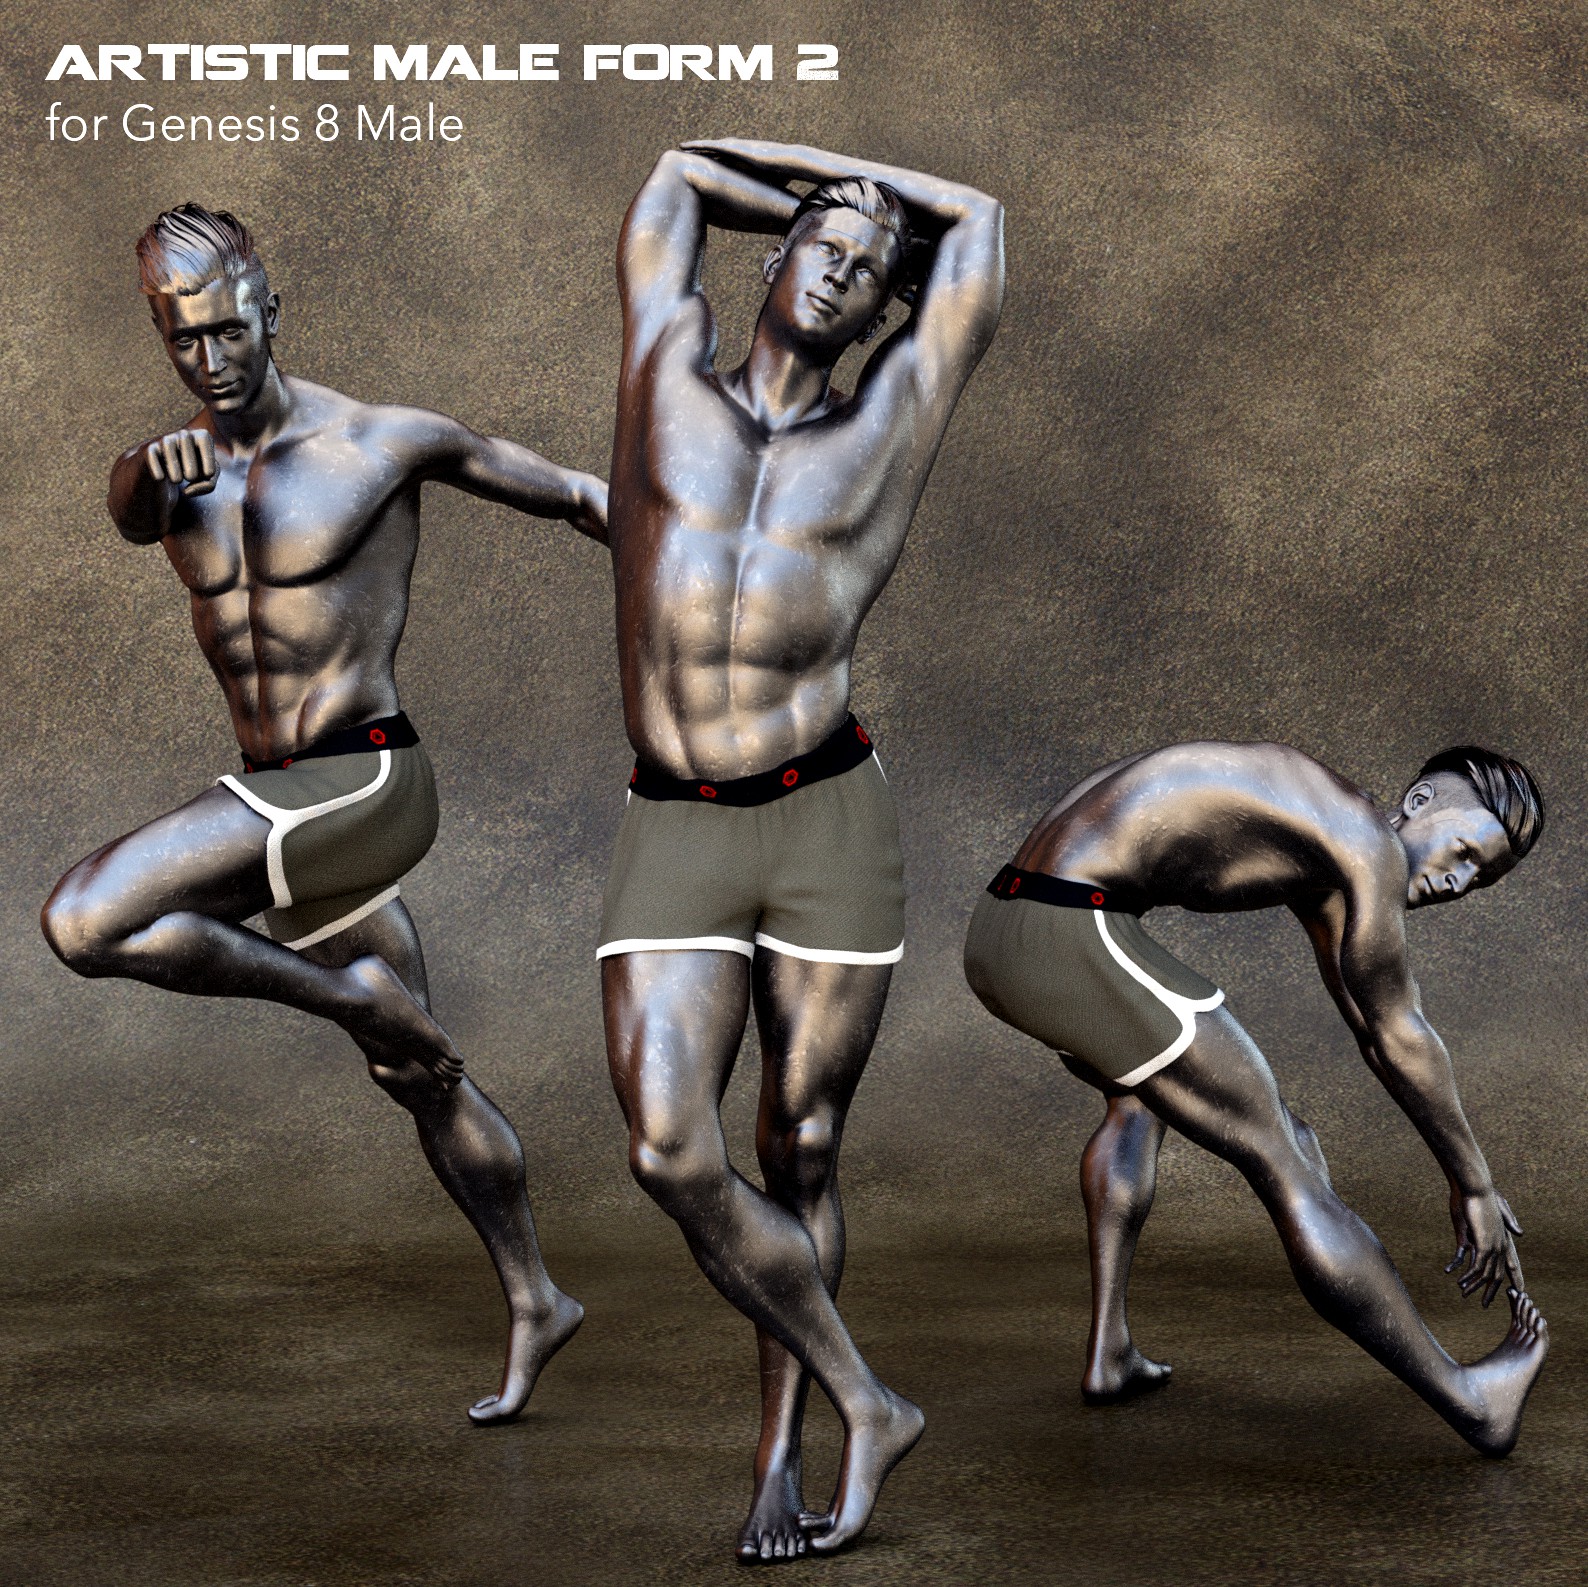 Artistic Male Form 2 for Genesis 8 Male